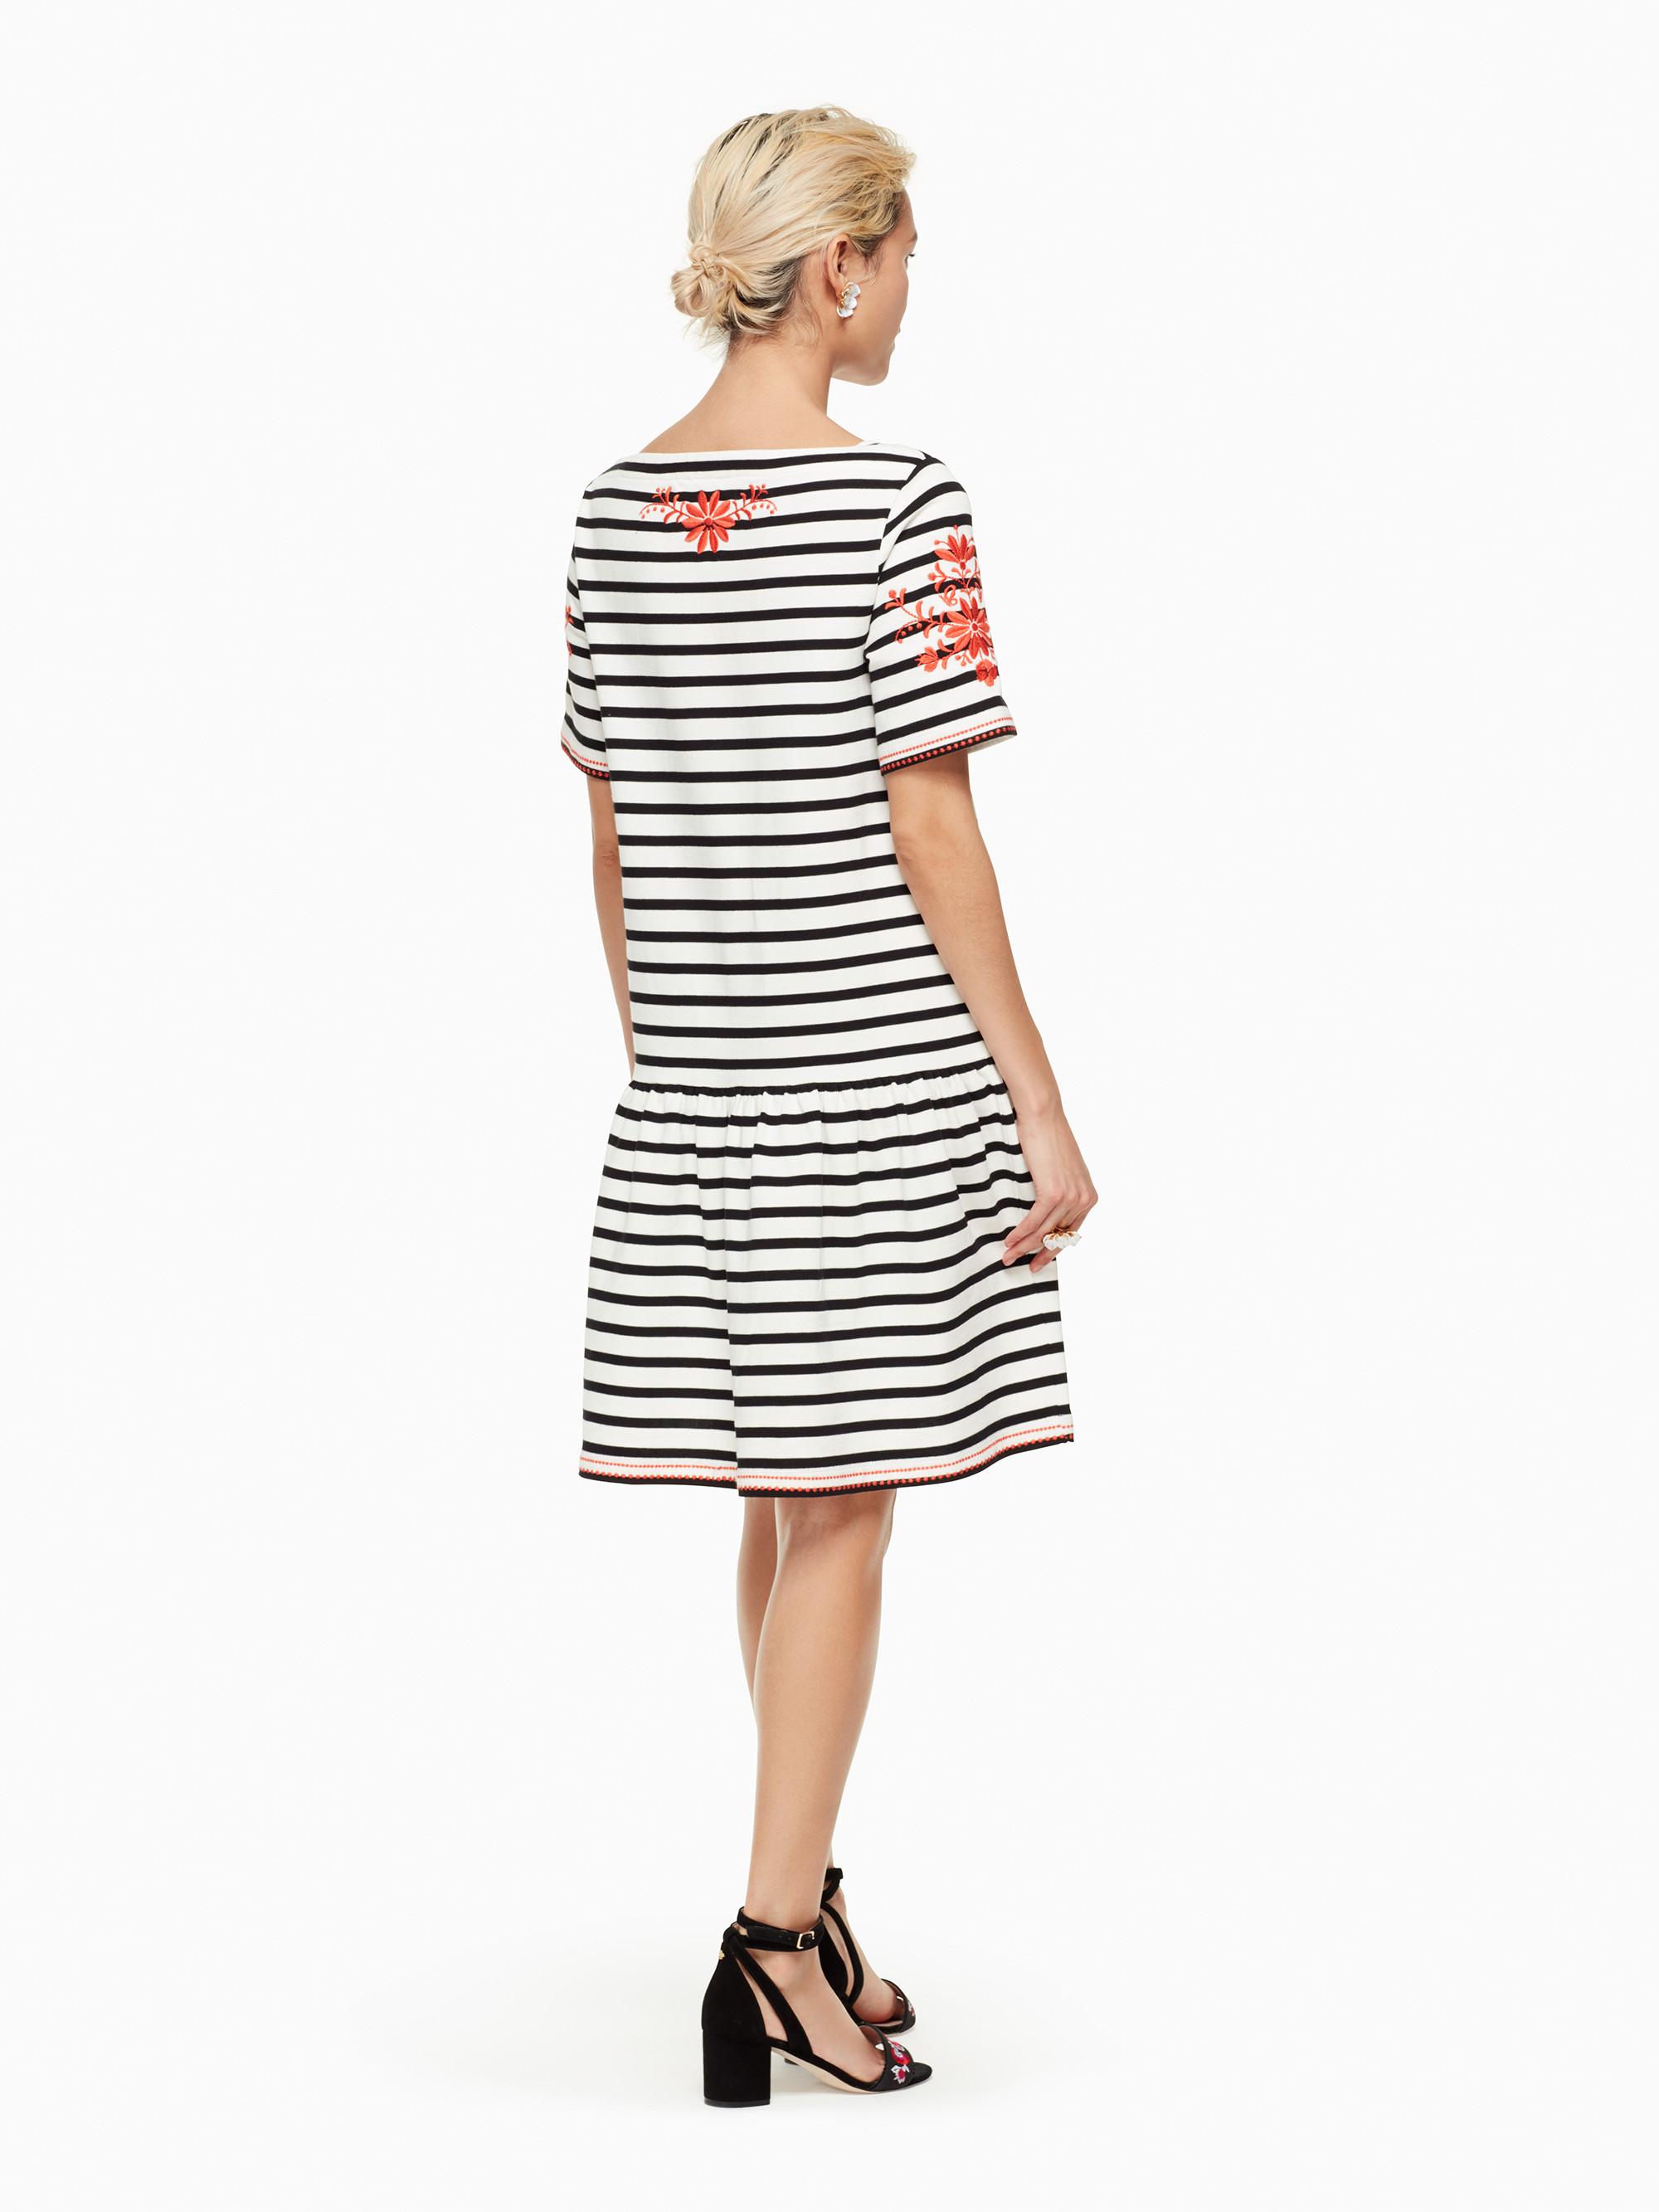 Lyst - Kate Spade Stripe Embroidered Dress